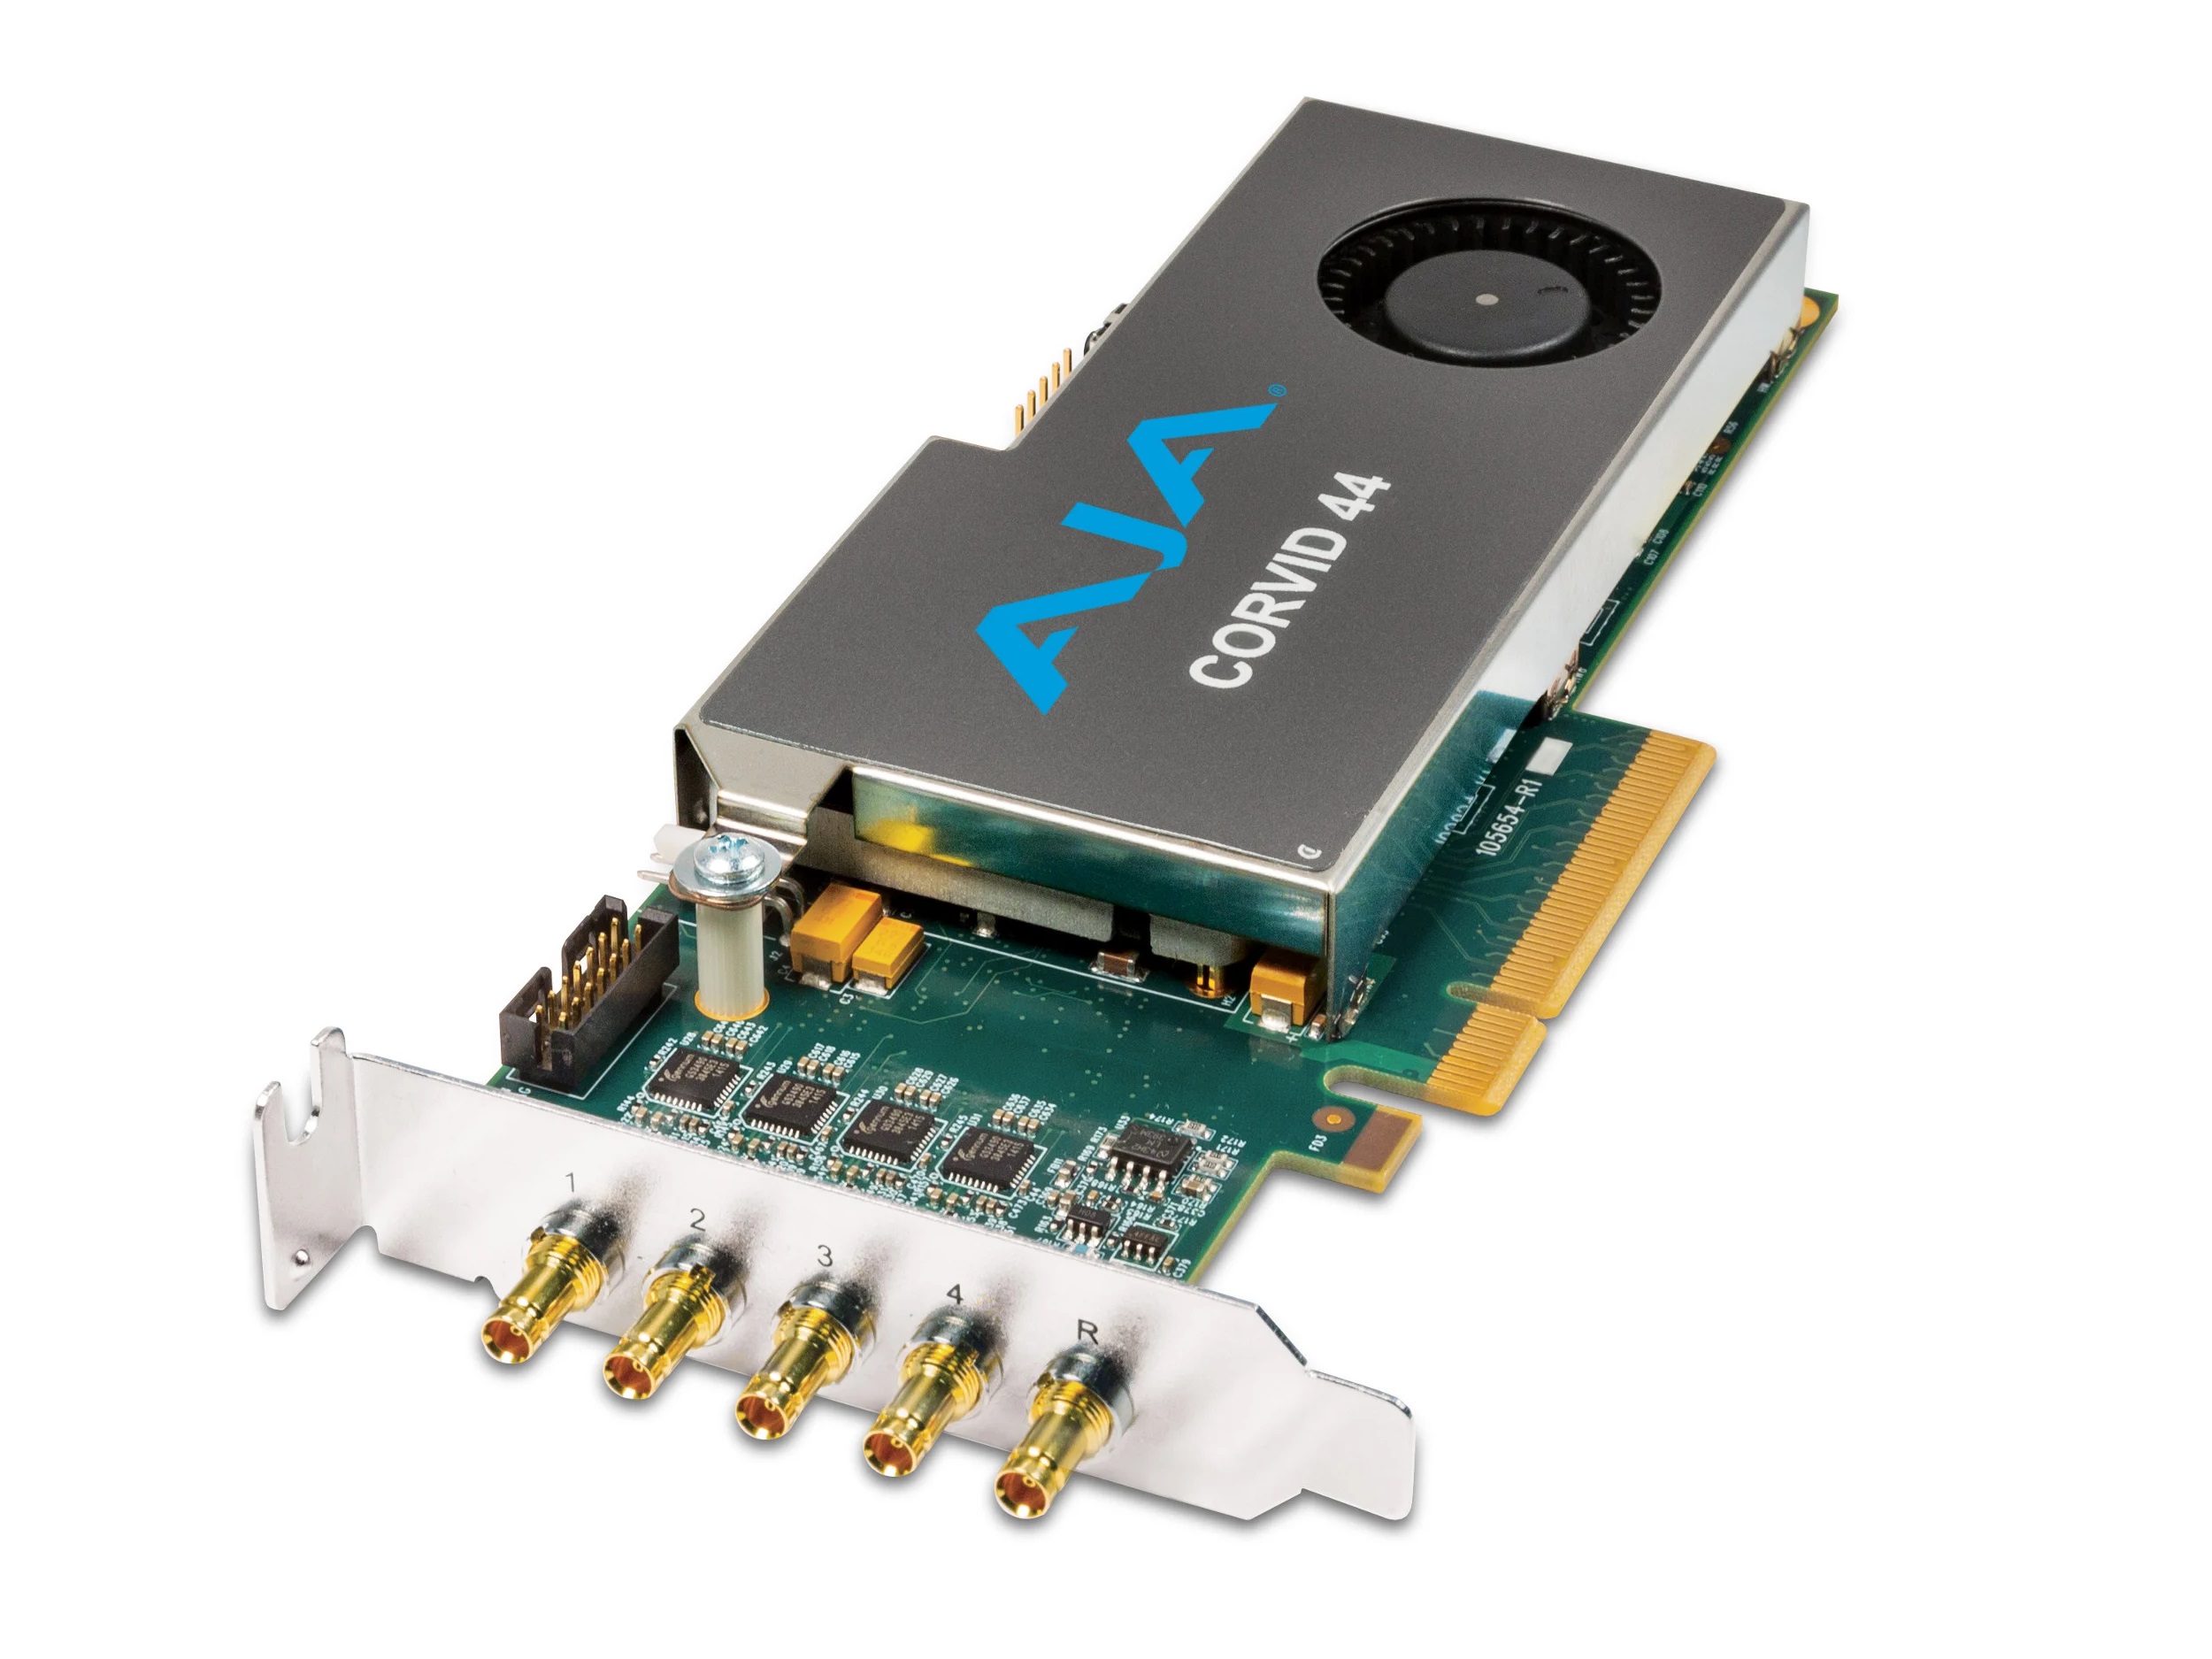 CRV44-S-NC1 Low-Profile 8-Lane PCIe/4x SDI Independently Configurable (No Cable) by AJA